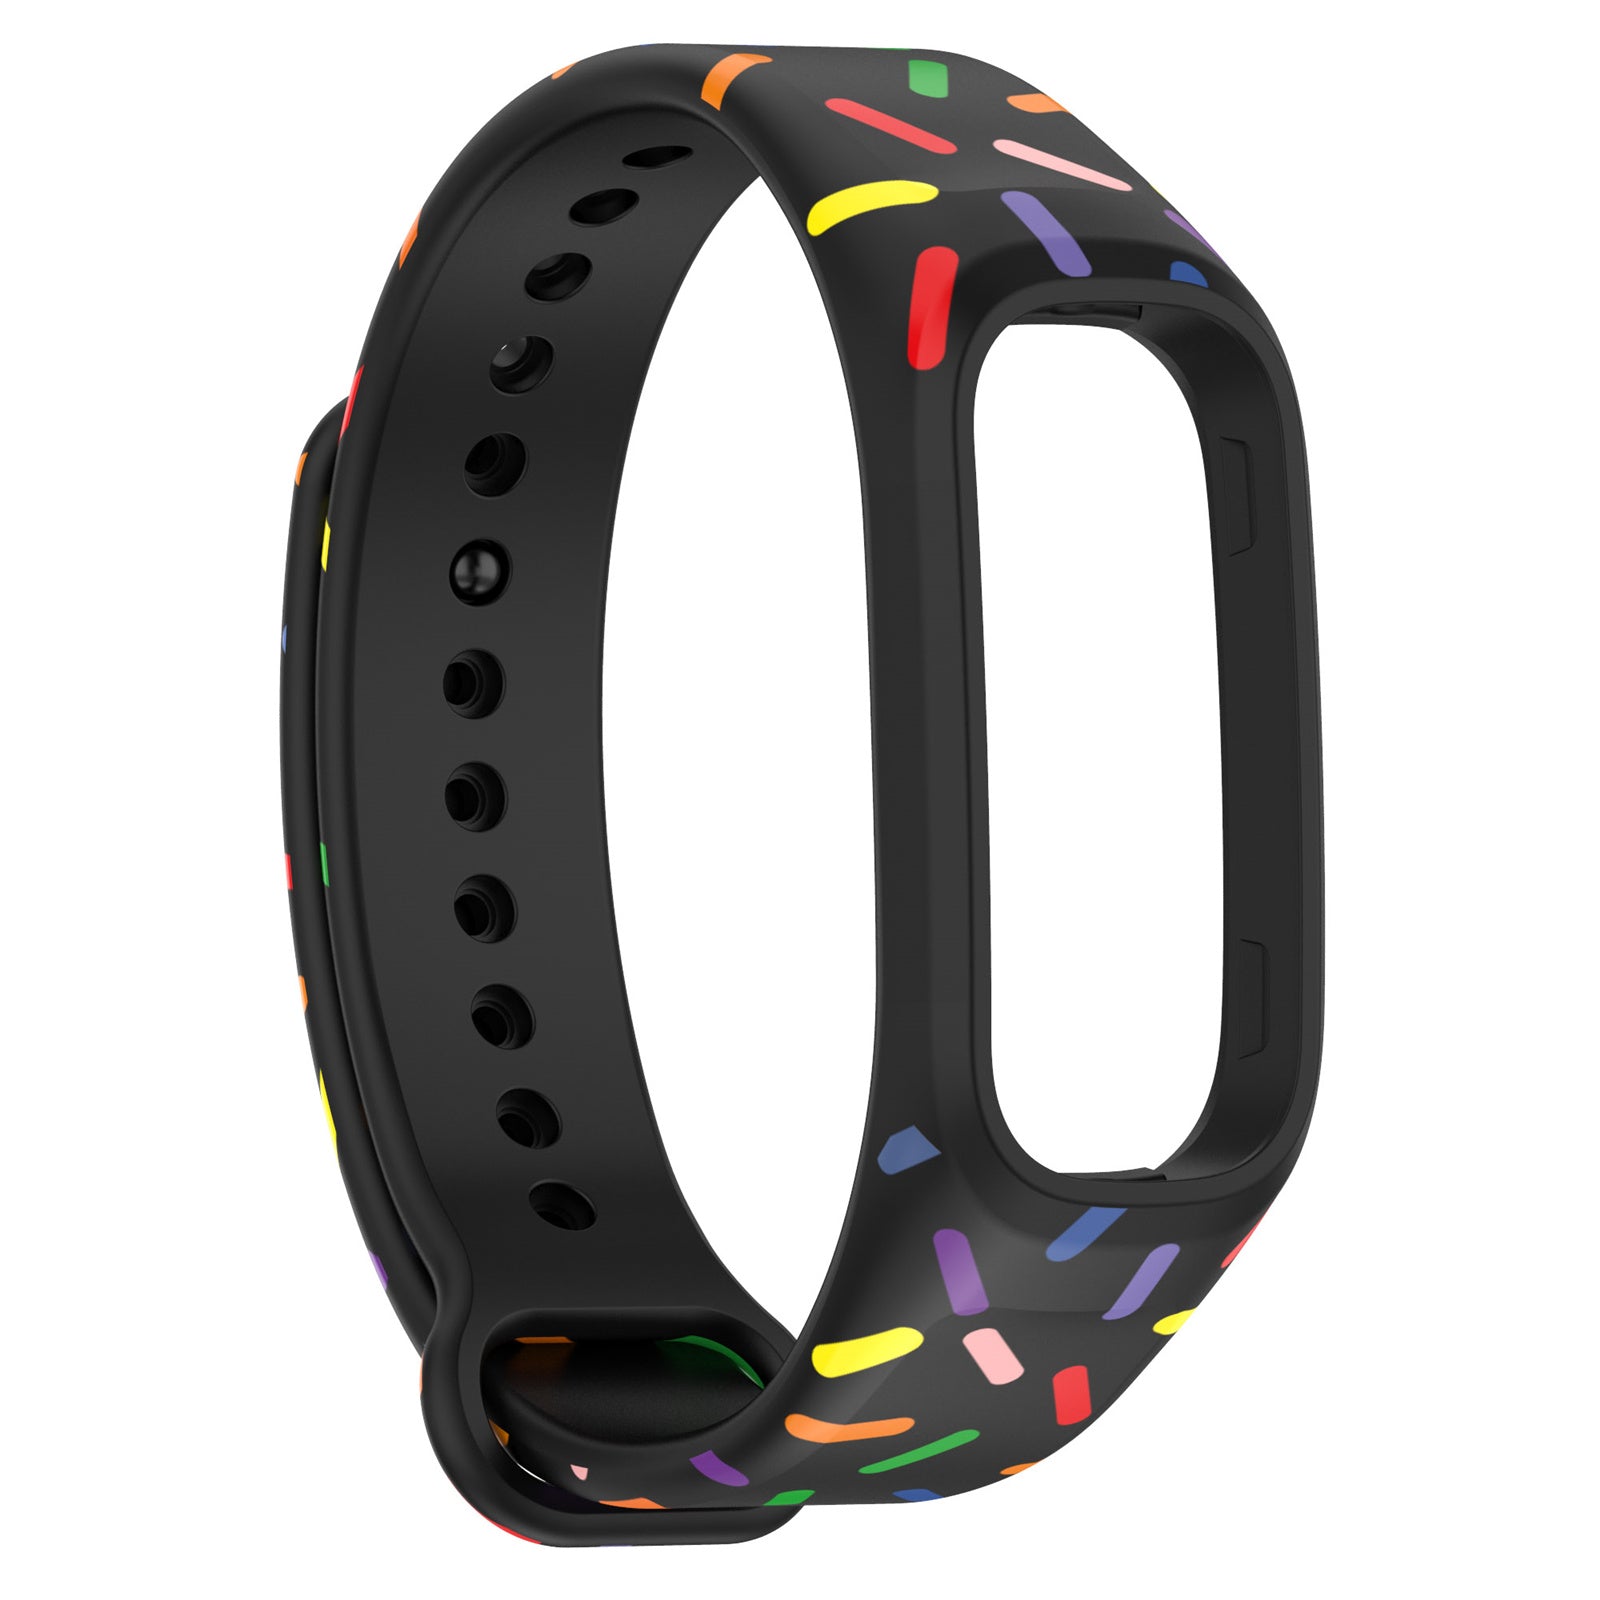 Uniqkart for Oppo Band Integrated Silicone Strap Watch Case Colorful Spotted Wrist Band - Black